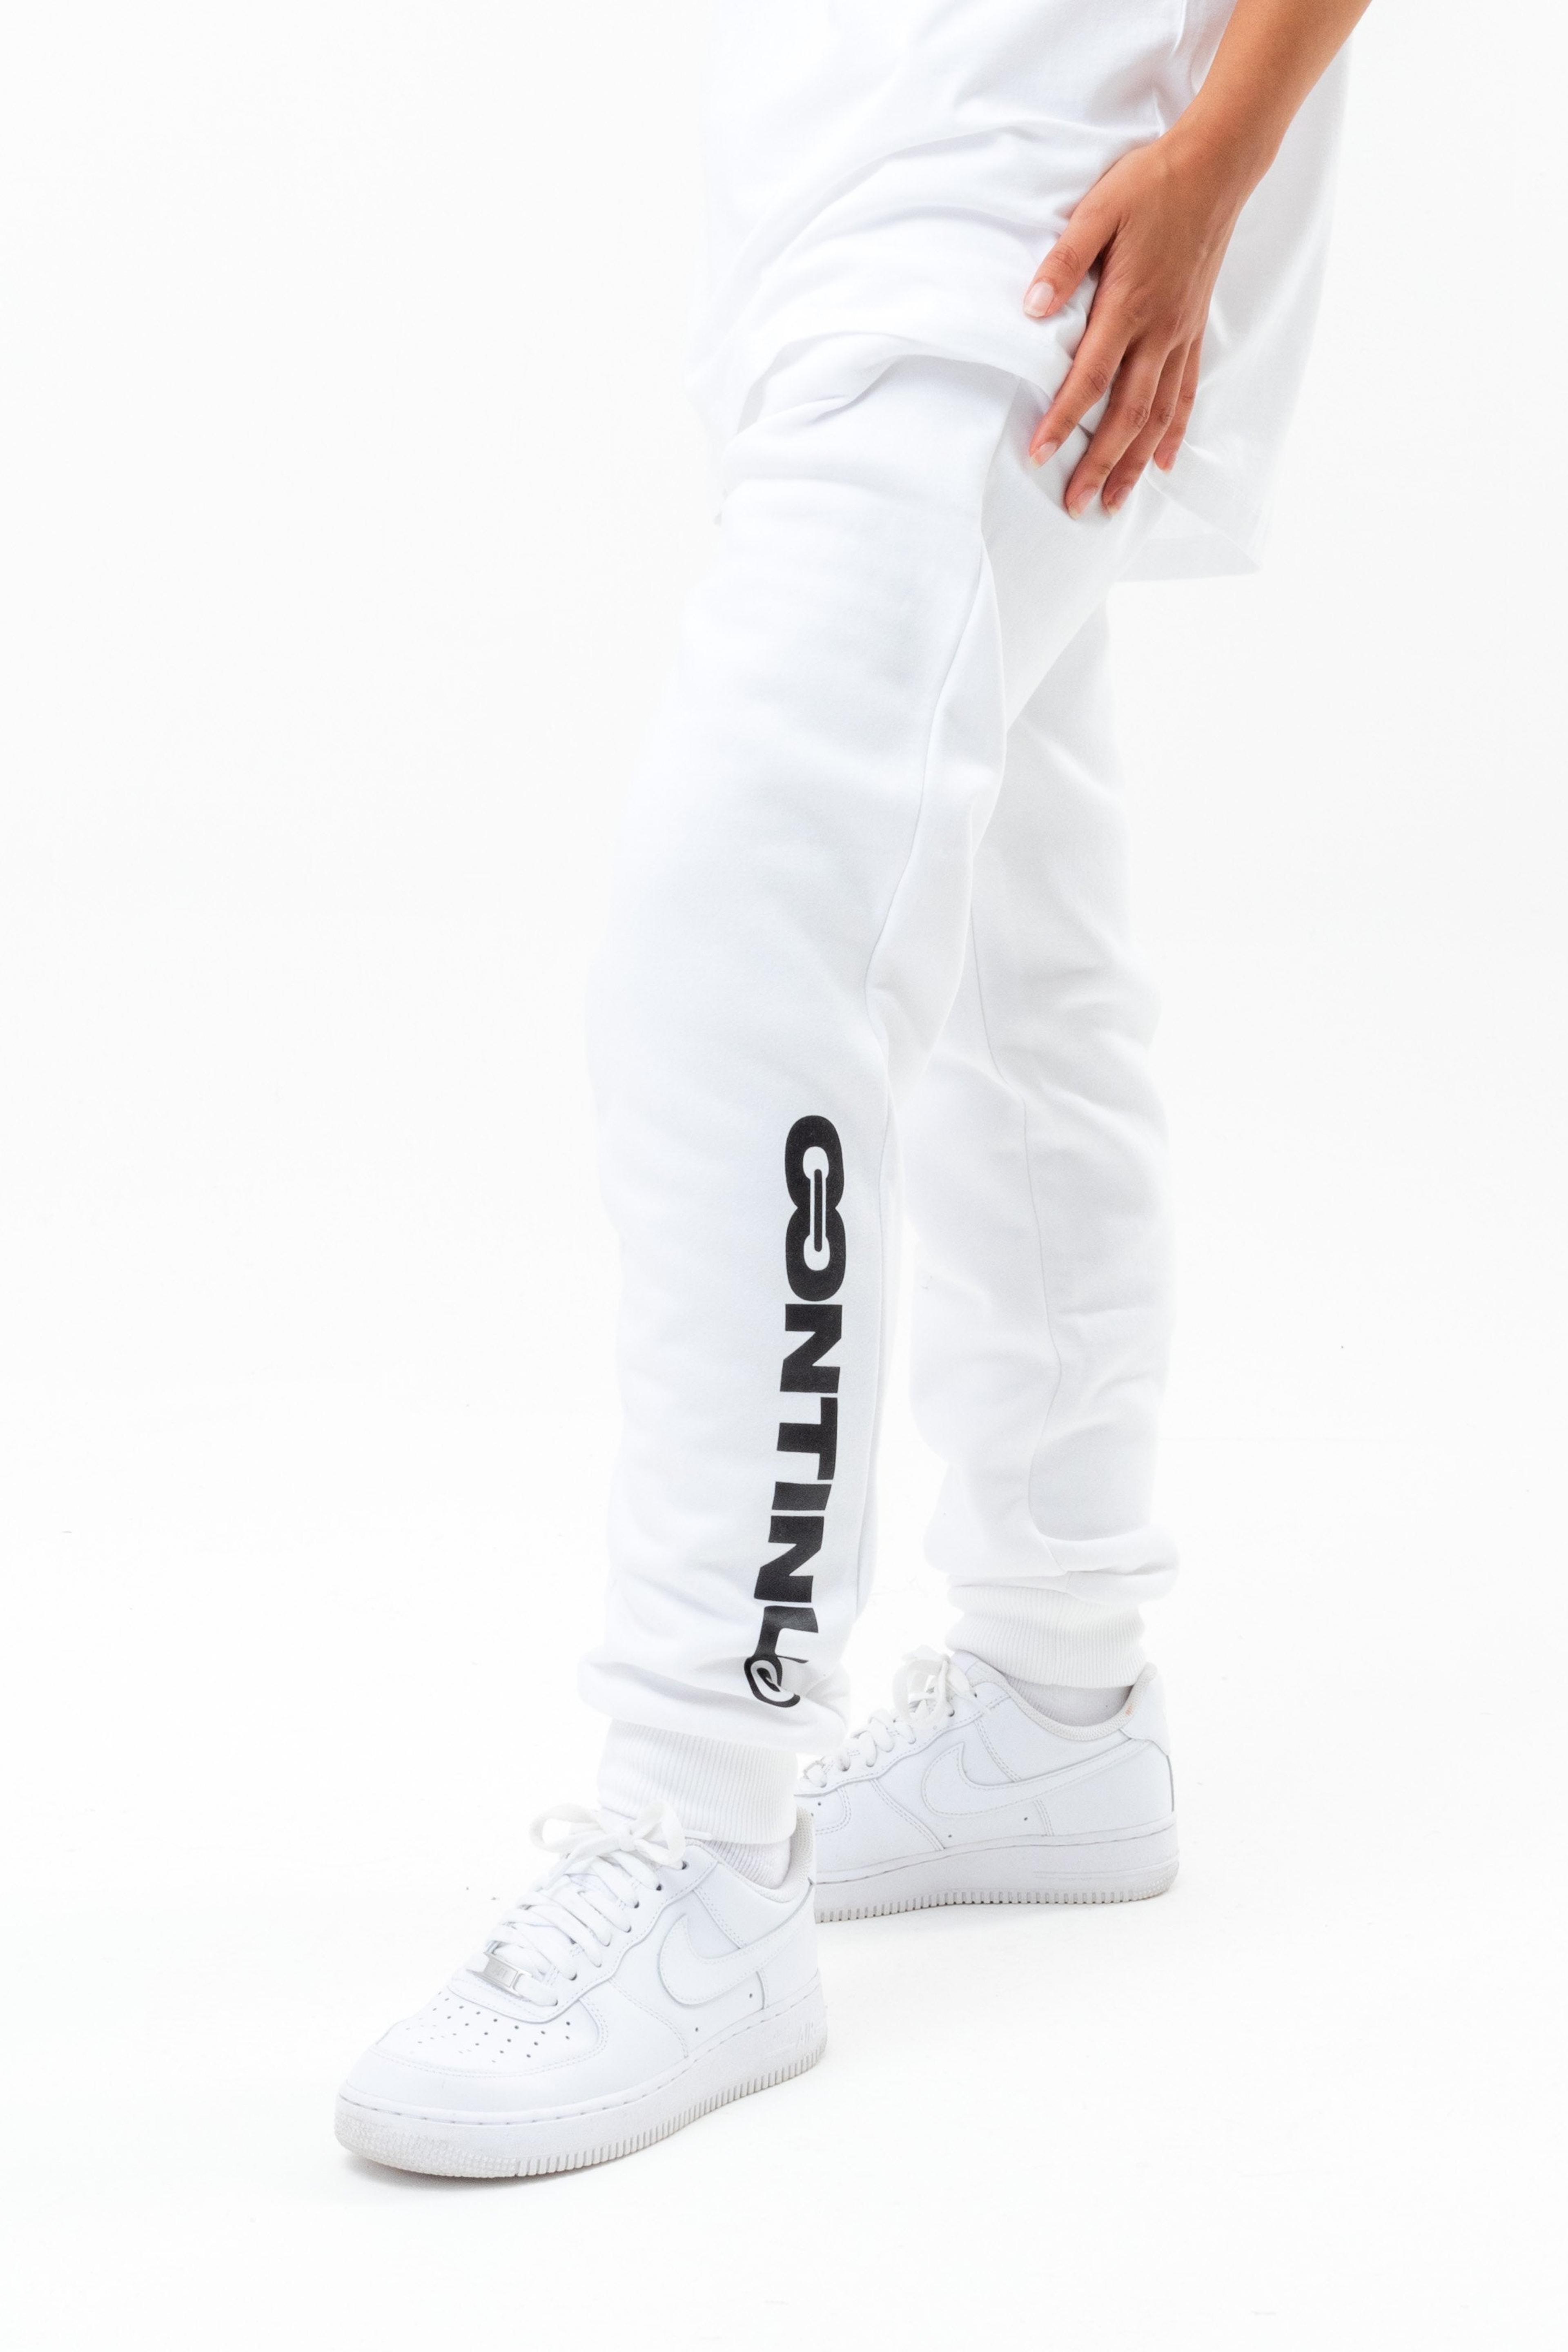 Alternate View 2 of CONTINU8 WHITE JOGGERS